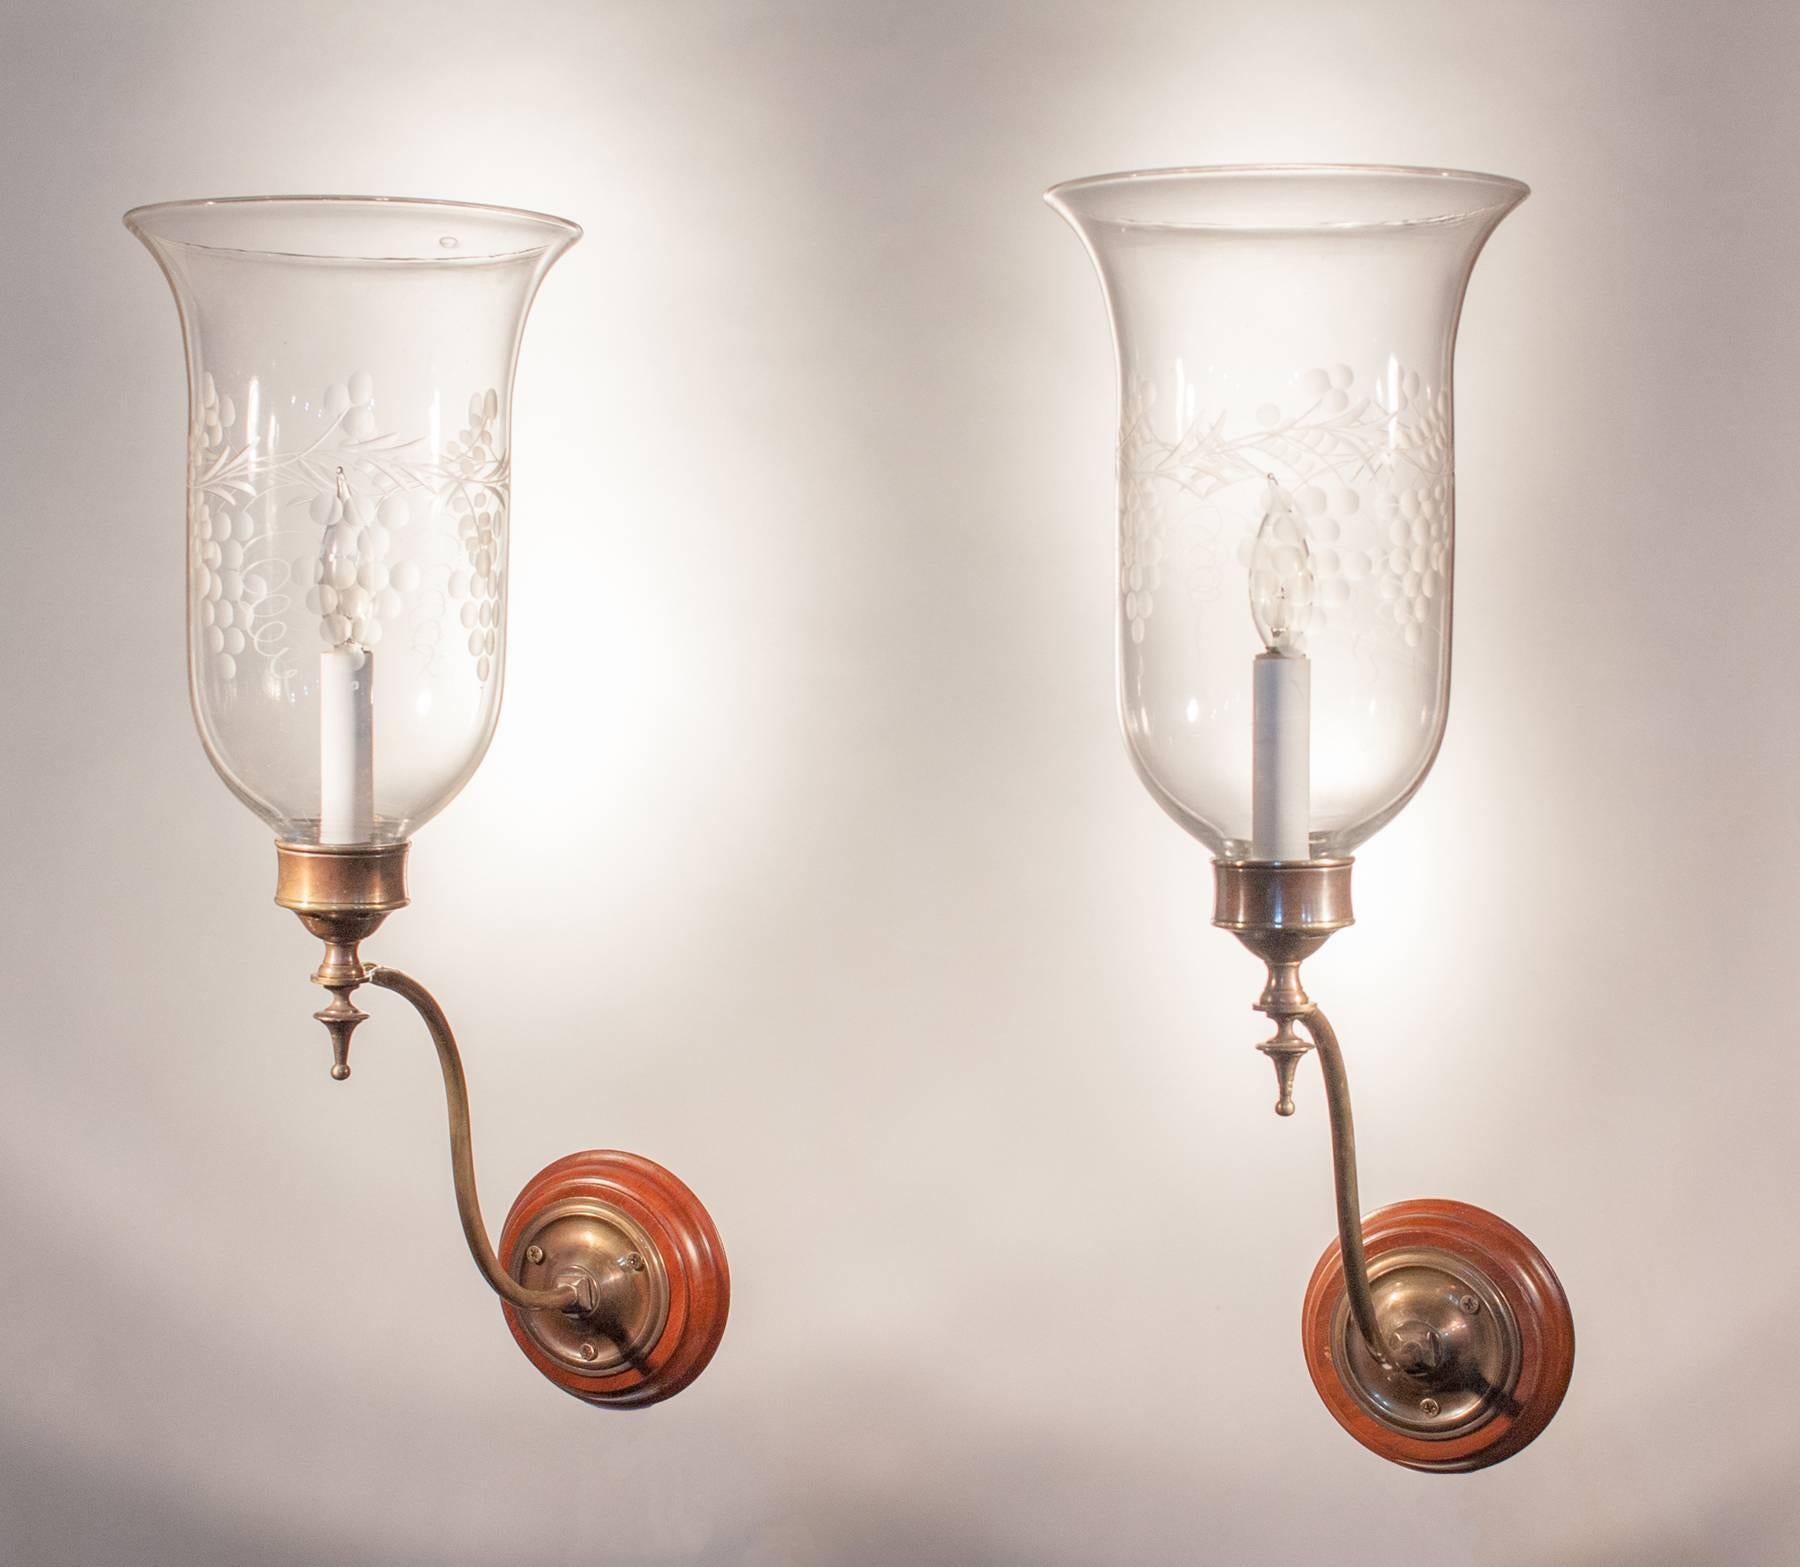 An exceptional pair of antique English hurricane sconce shades. These circa 1890 handblown glass shades feature an etched grape and vine motif that complements the flared form. The wall sconces have been newly electrified, each with a single